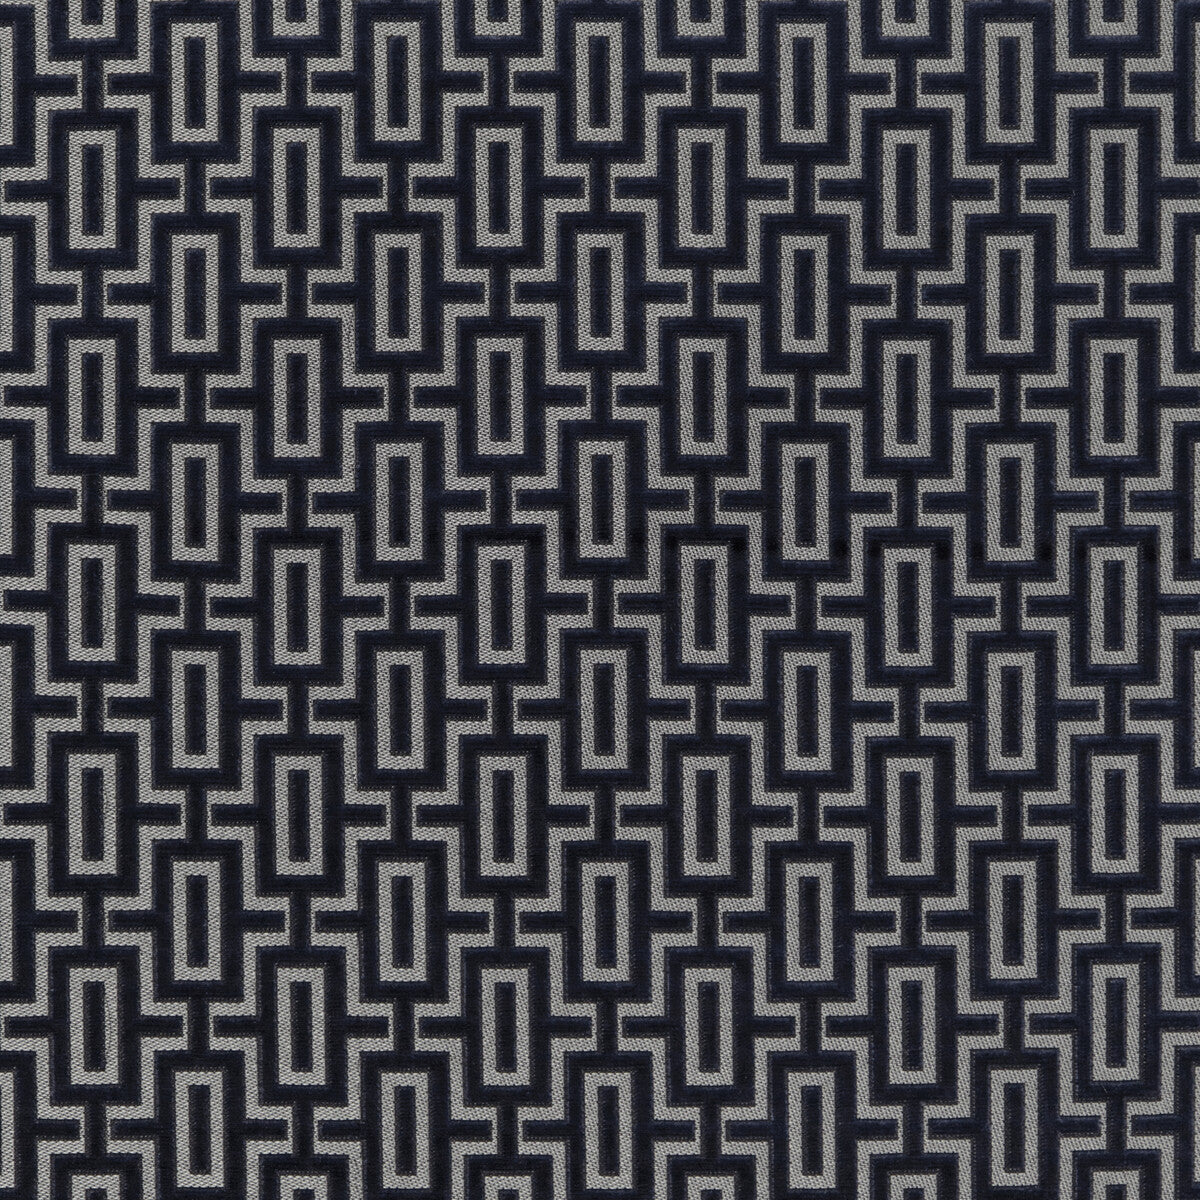 Joyride fabric in manhattan color - pattern 37286.8.0 - by Kravet Contract in the Happy Hour collection